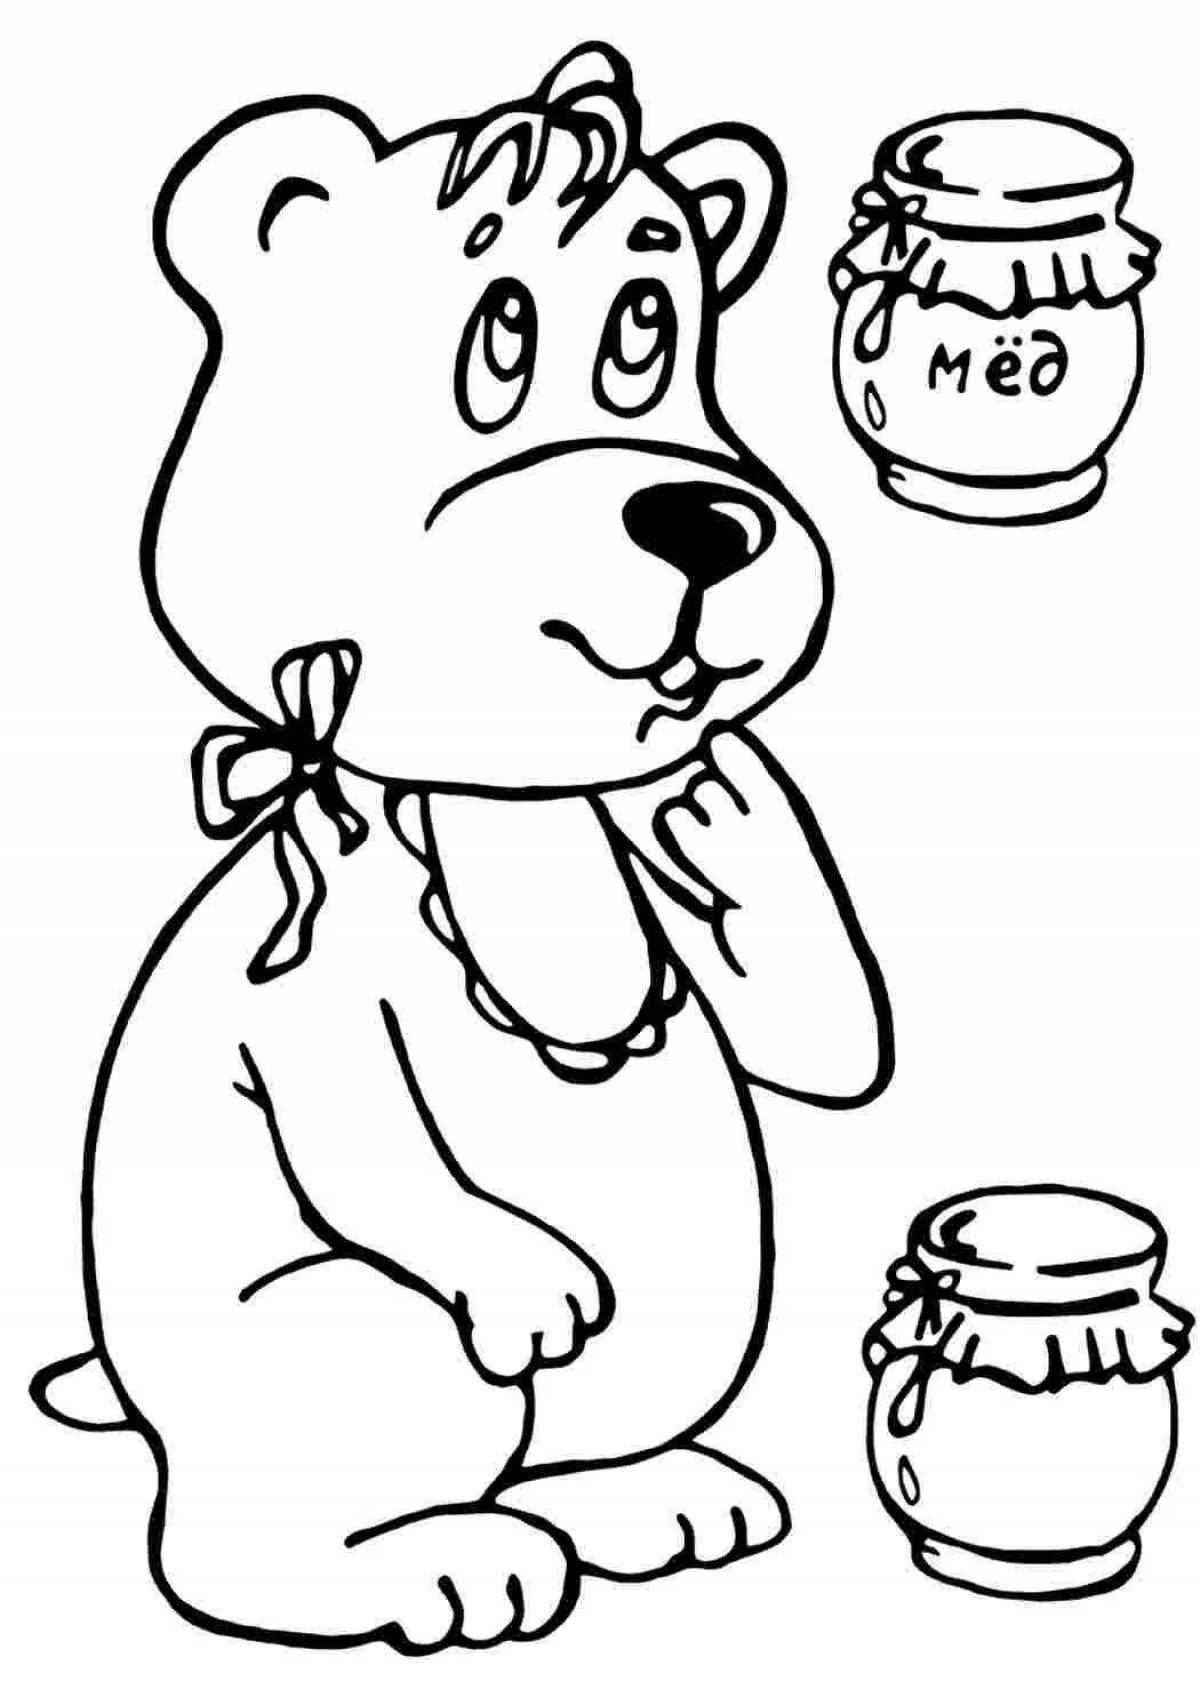 Comic bear with honey coloring book